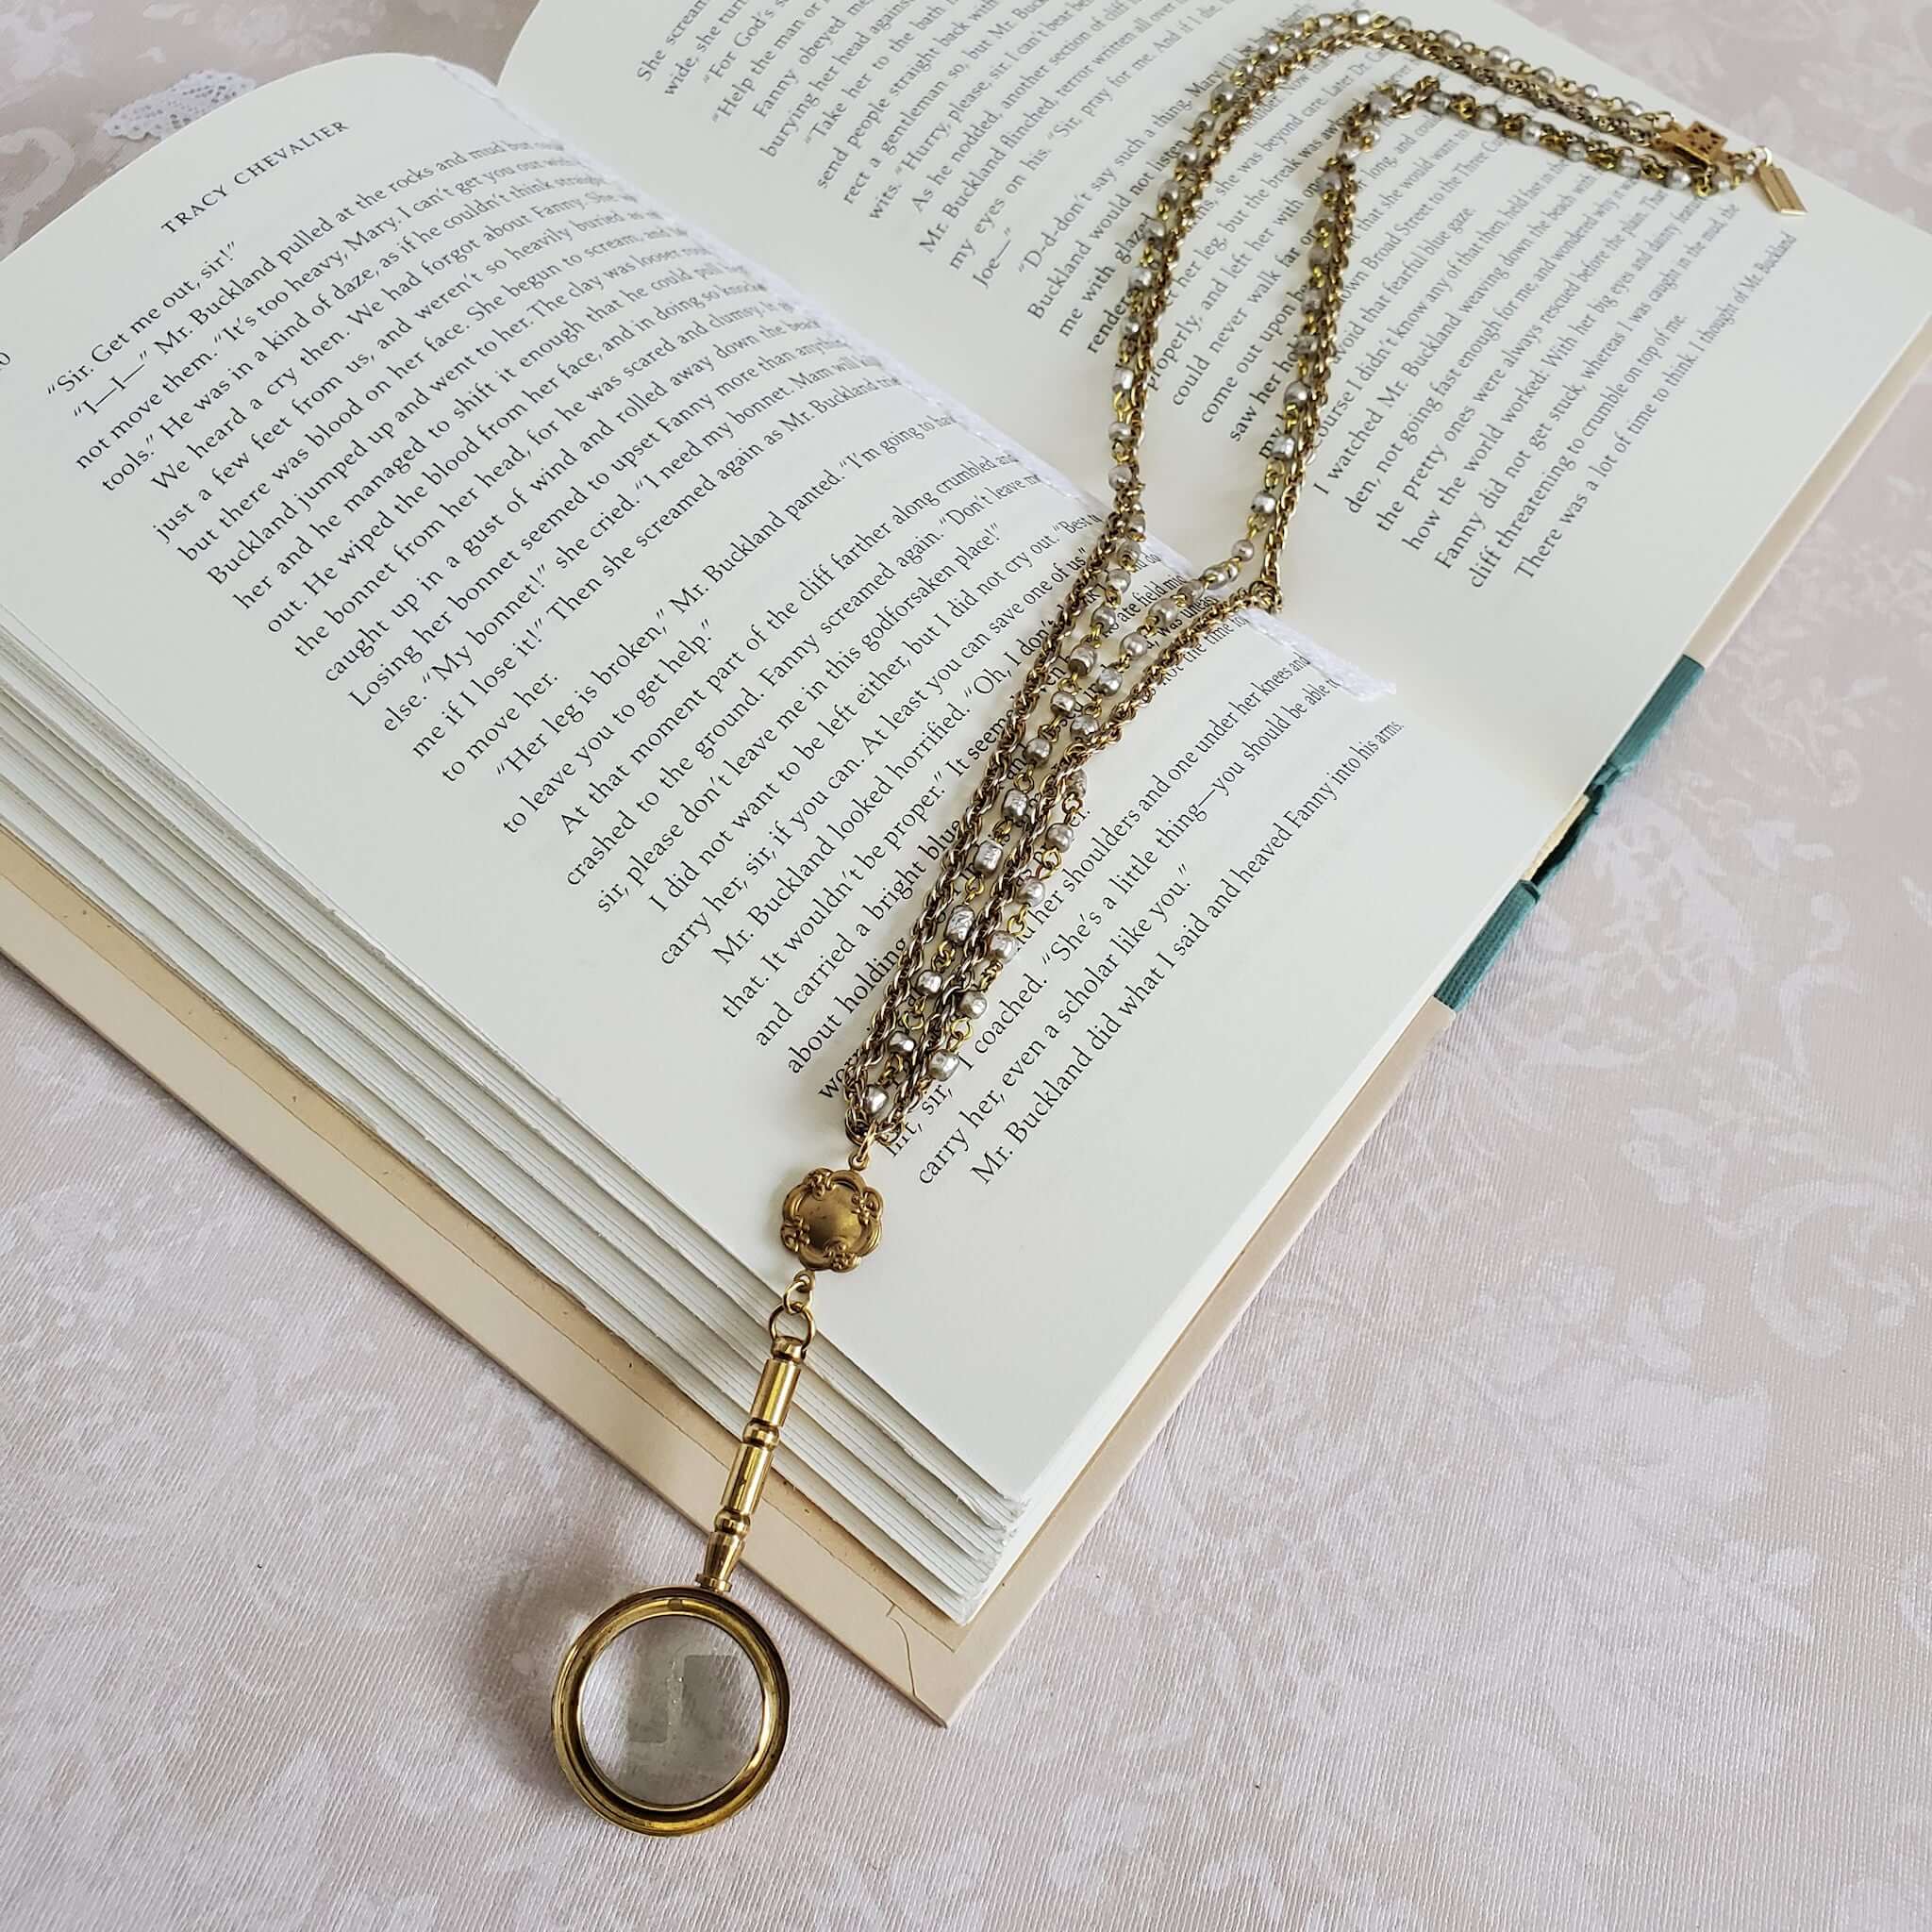 Vintage Style Magnifying Glass Pendant Necklace Victorian -   Magnifying  glass pendants, Glass pendant necklace, Vintage style necklace